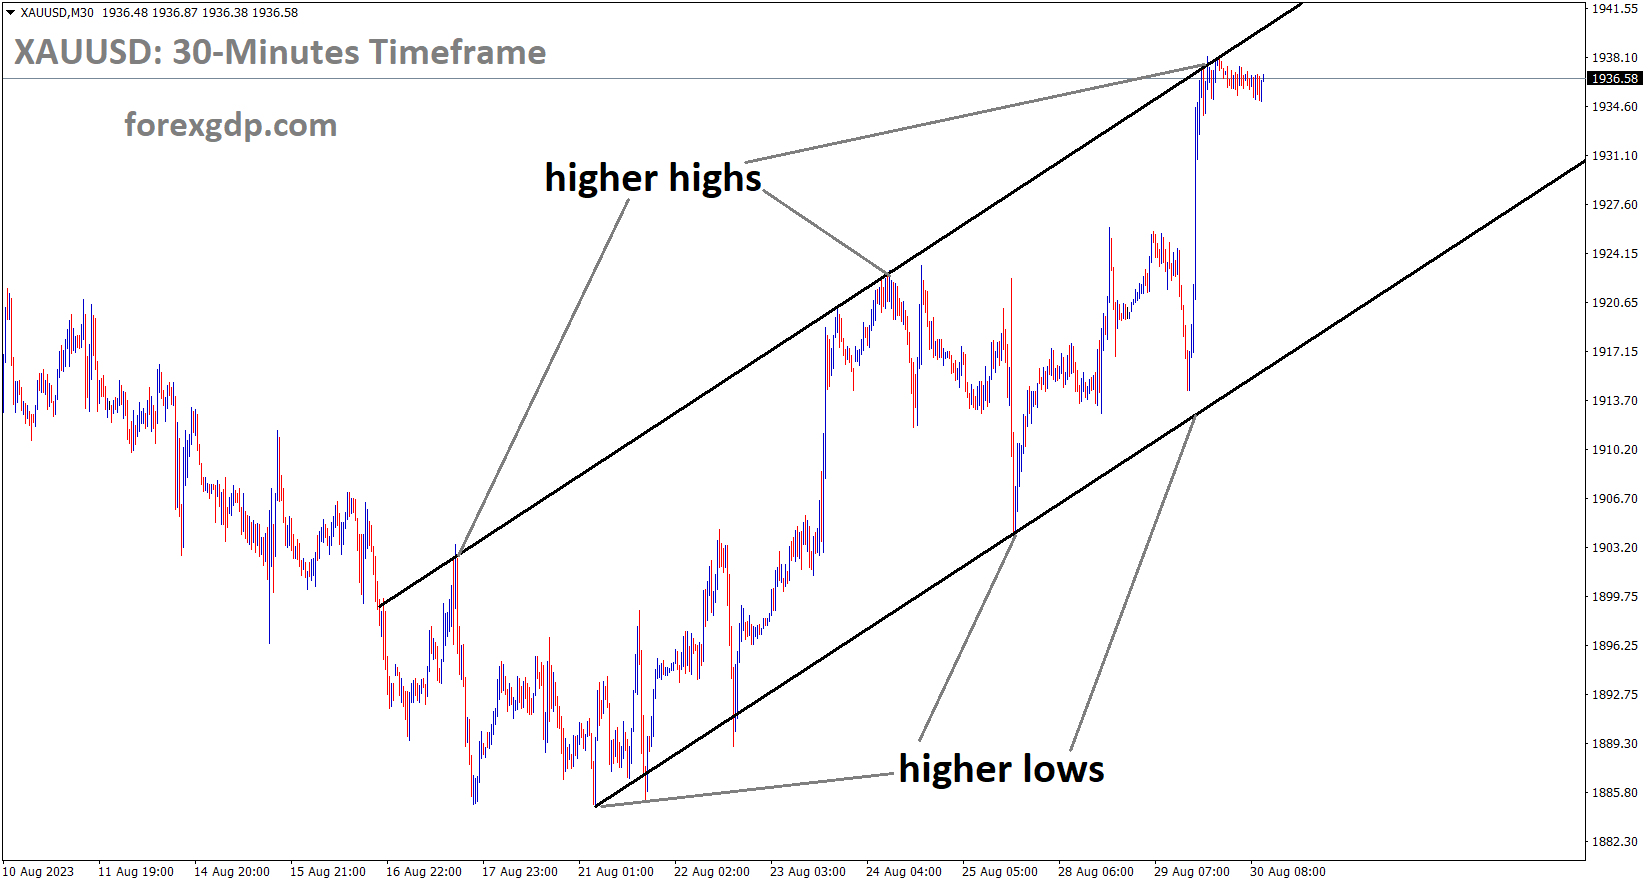 XAUUSD Gold price is moving in an Ascending channel and the market has reached the higher high area of the channel